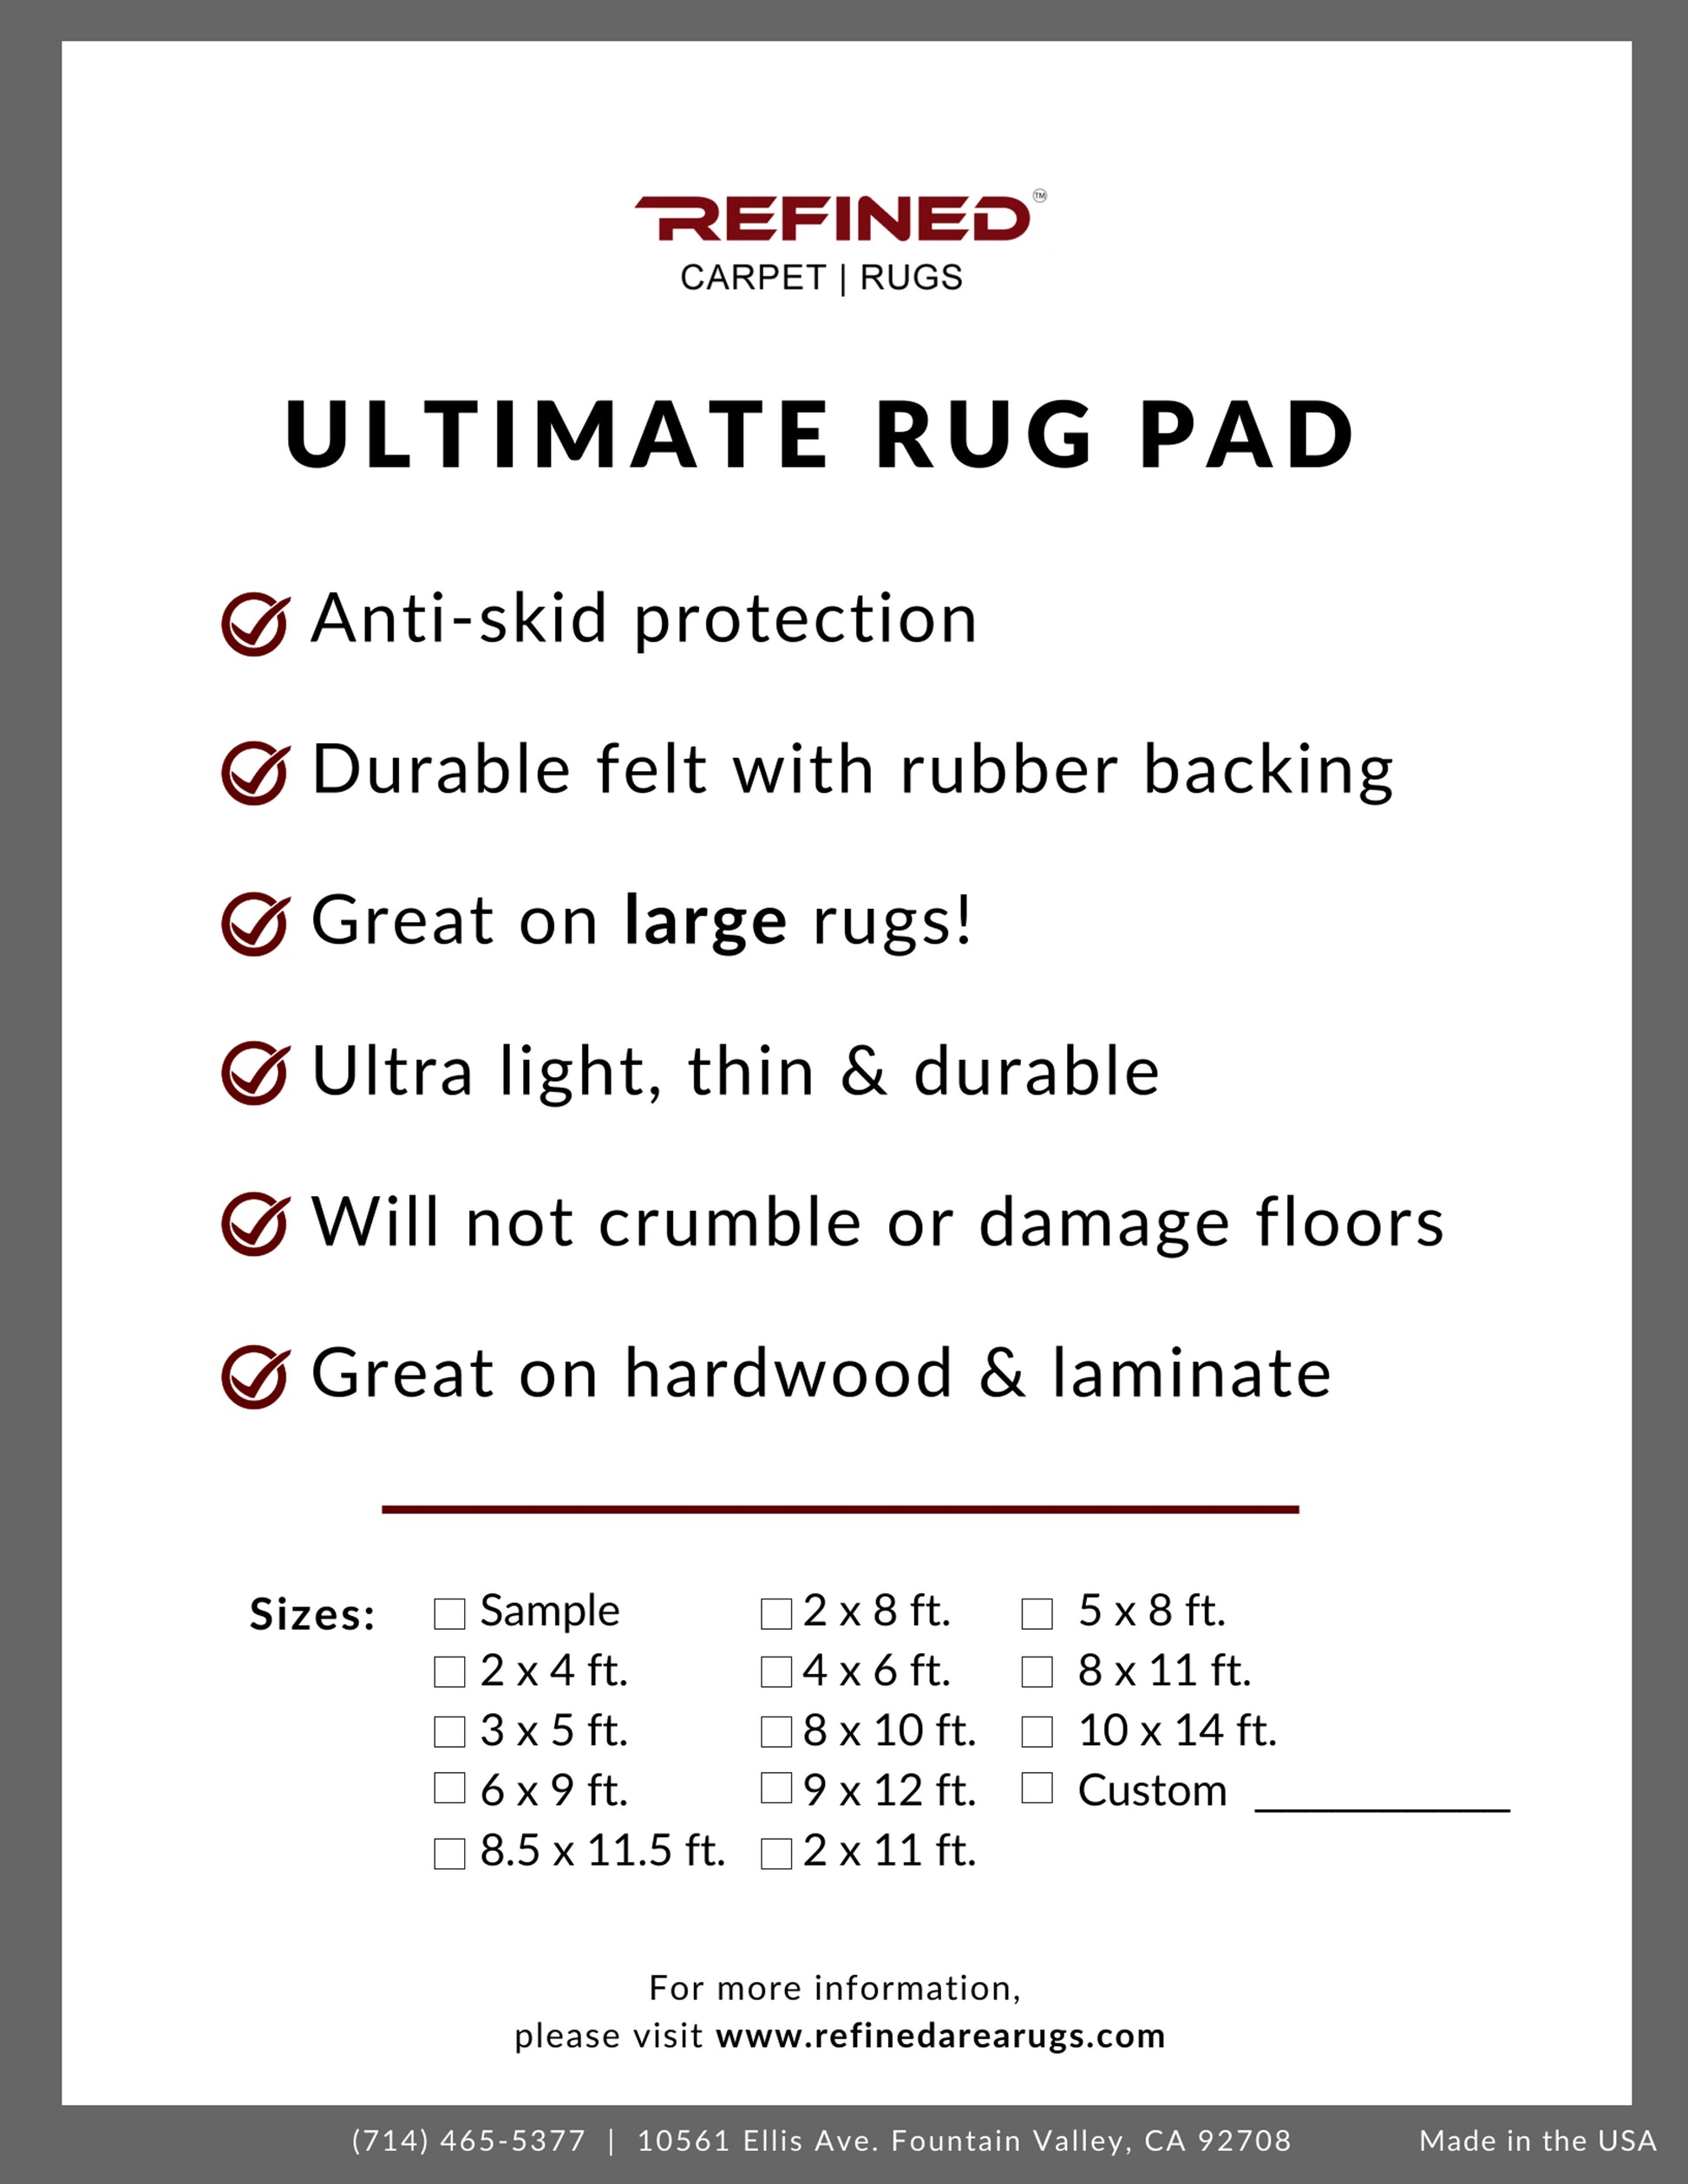 area rug pad non skid good material non sticky non adhesive refined carpet best rug pad ultimate rug pad